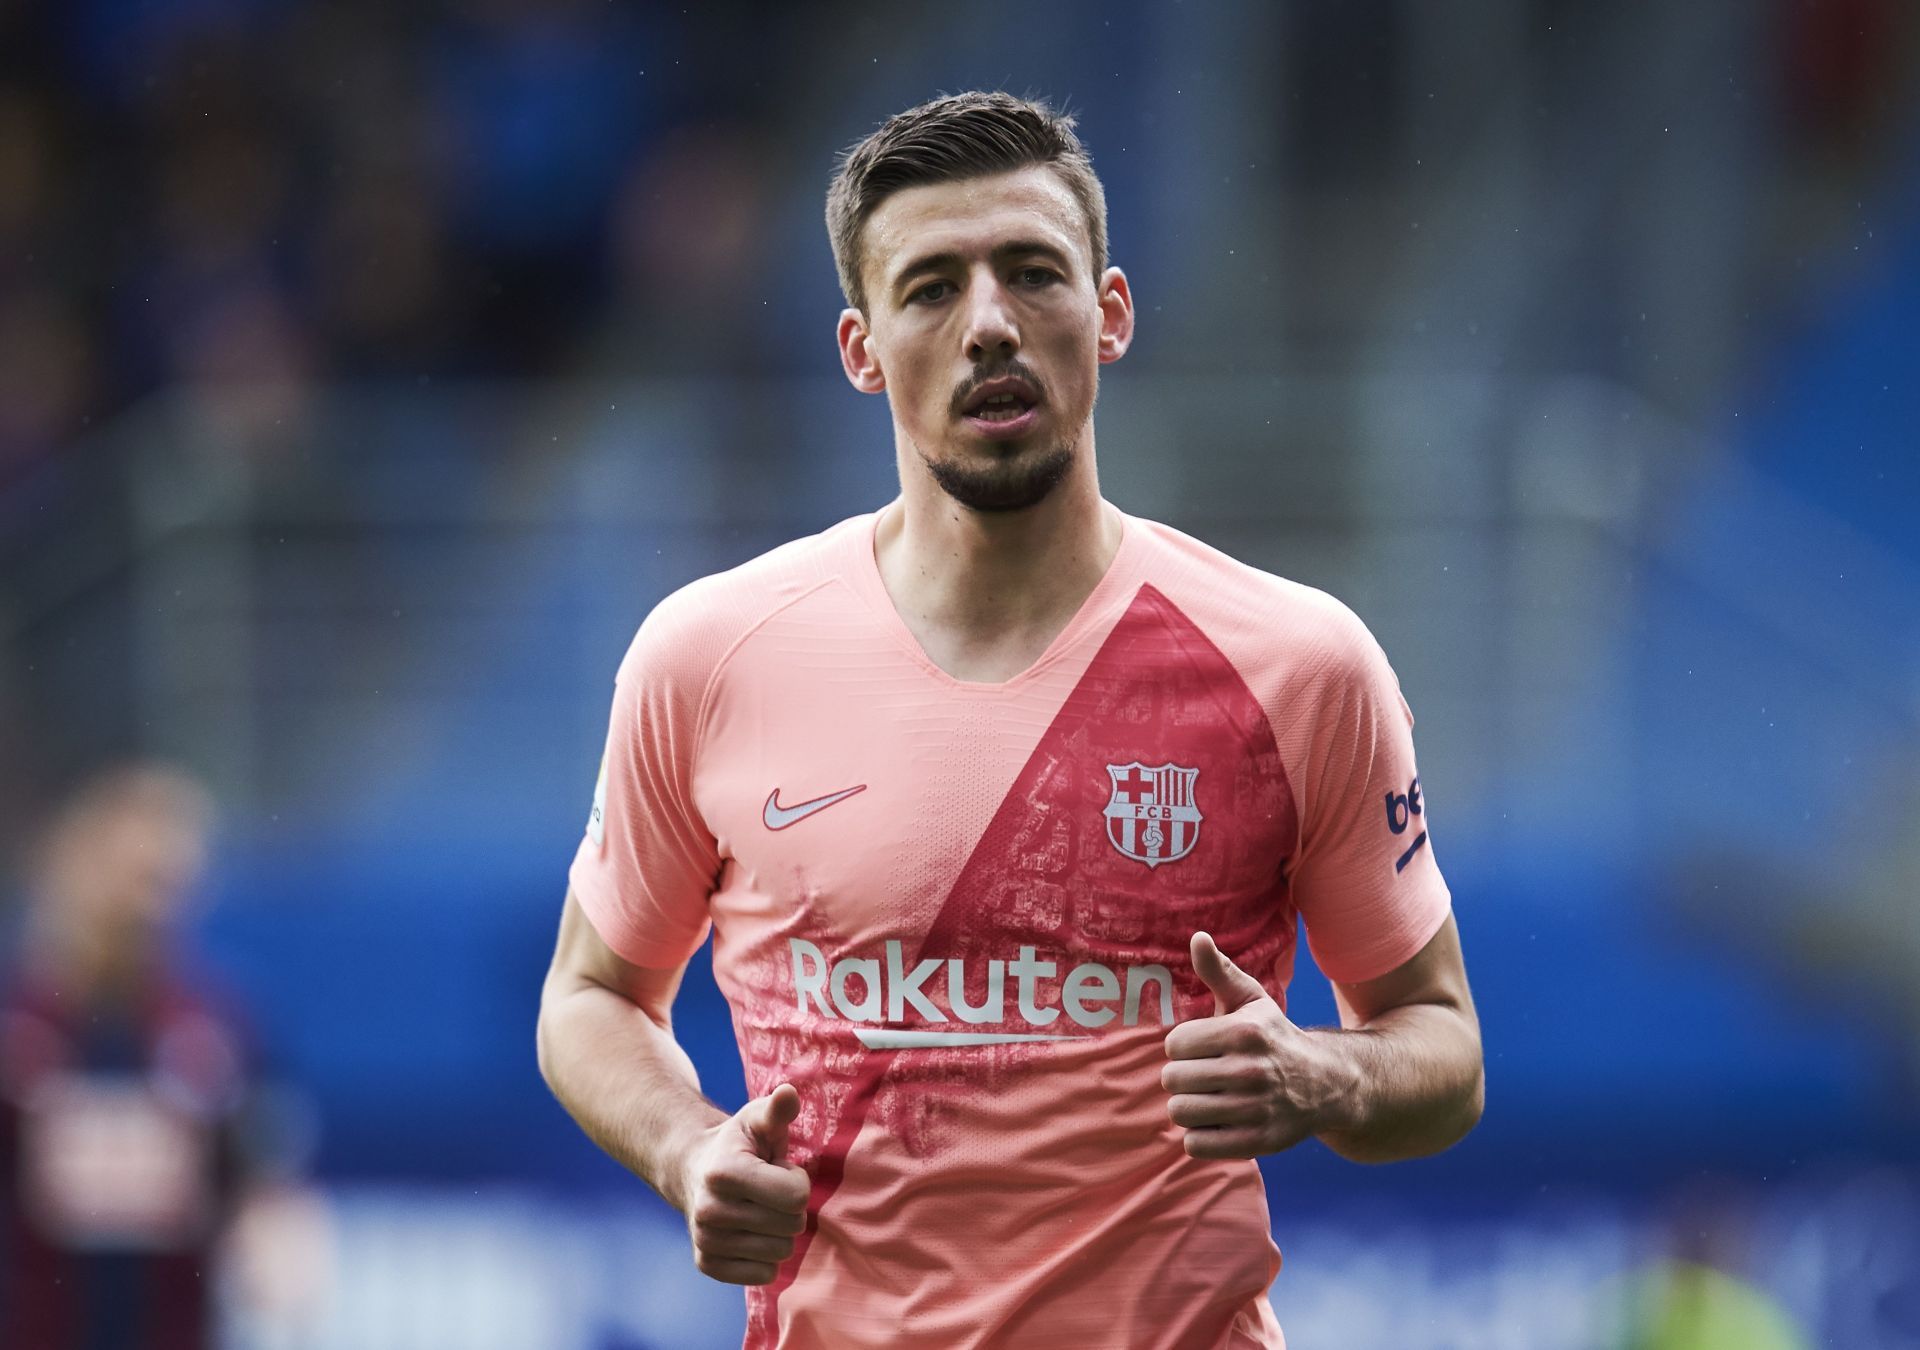 Lenglet has been very disappointing recently